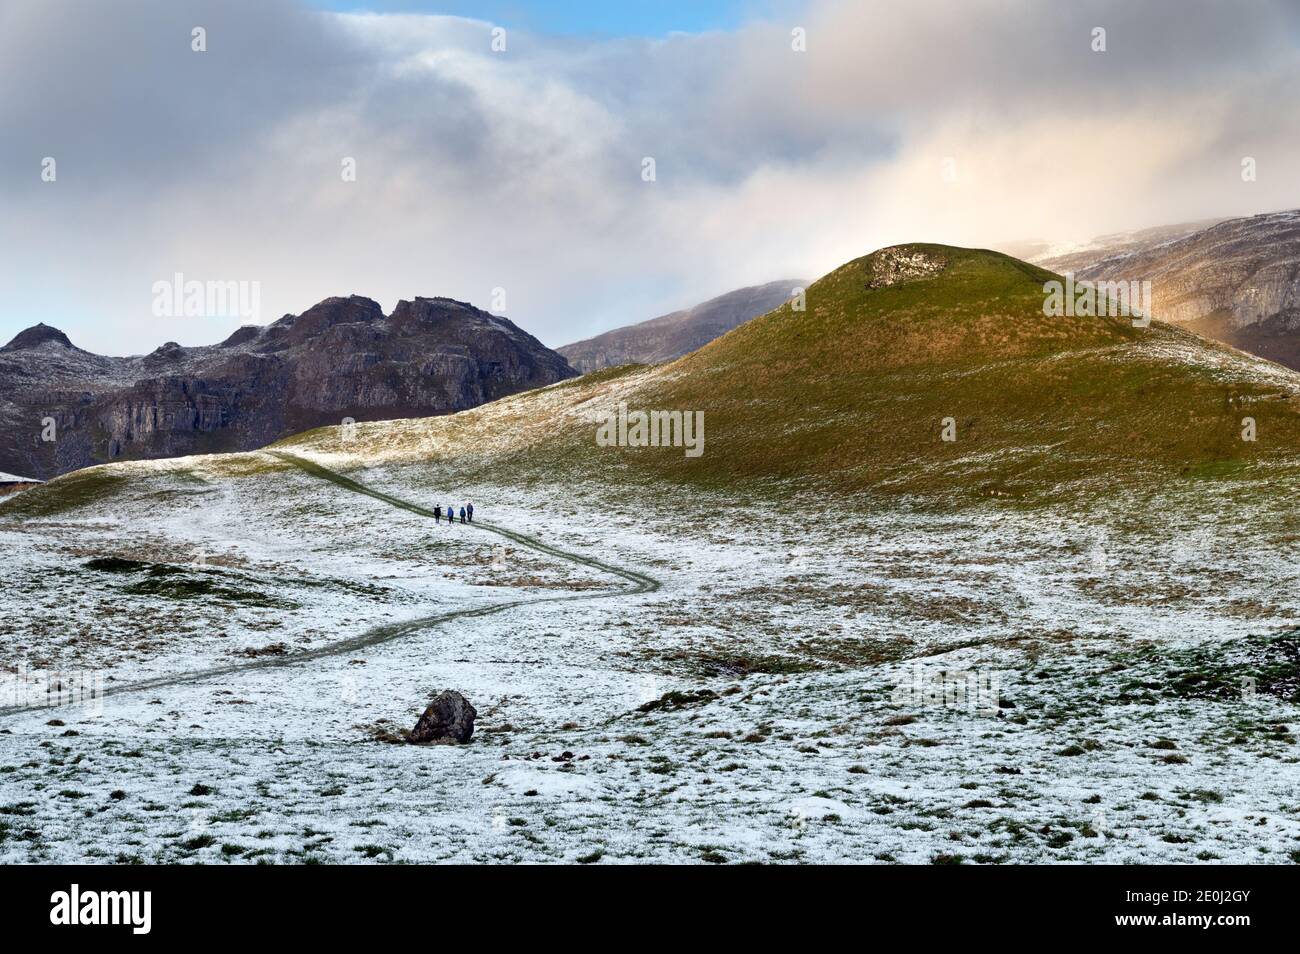 Winter walkers pass Sugar Loaf Hill near Settle, Yorkshire Dales National Park, UK. Warrendale Knotts and Attermire Scar are seen in the distance. Stock Photo